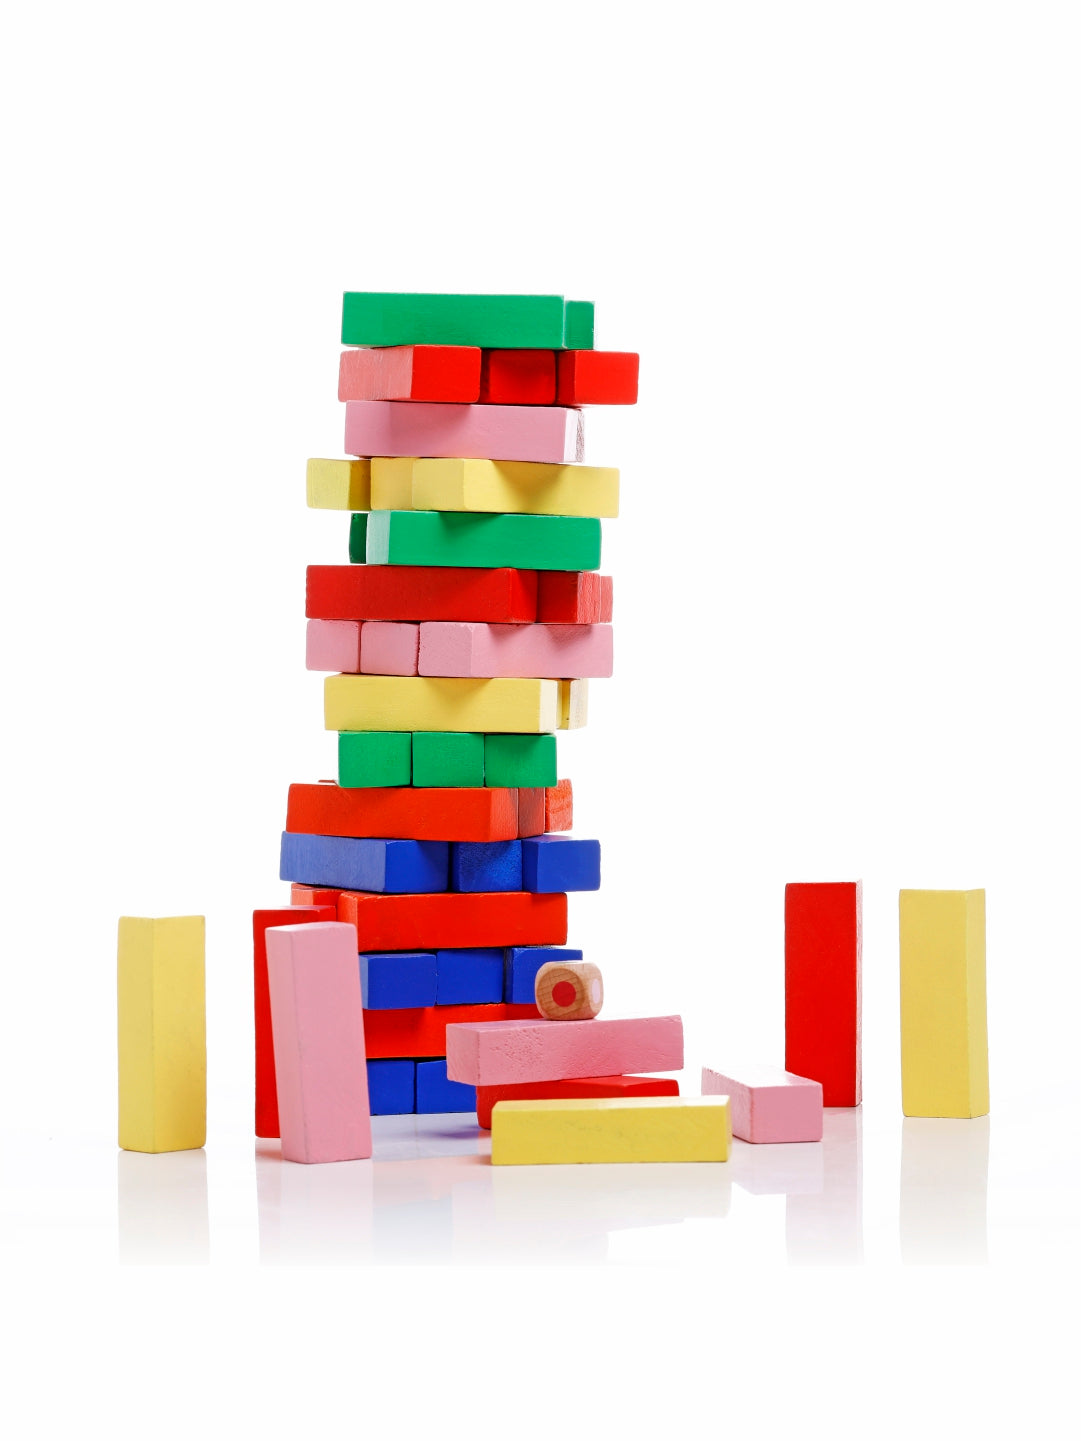 Colorful Wooden Tumbling Tower Game Jenga / Zenga. Puzzle Game for Adults and Kids - chanak